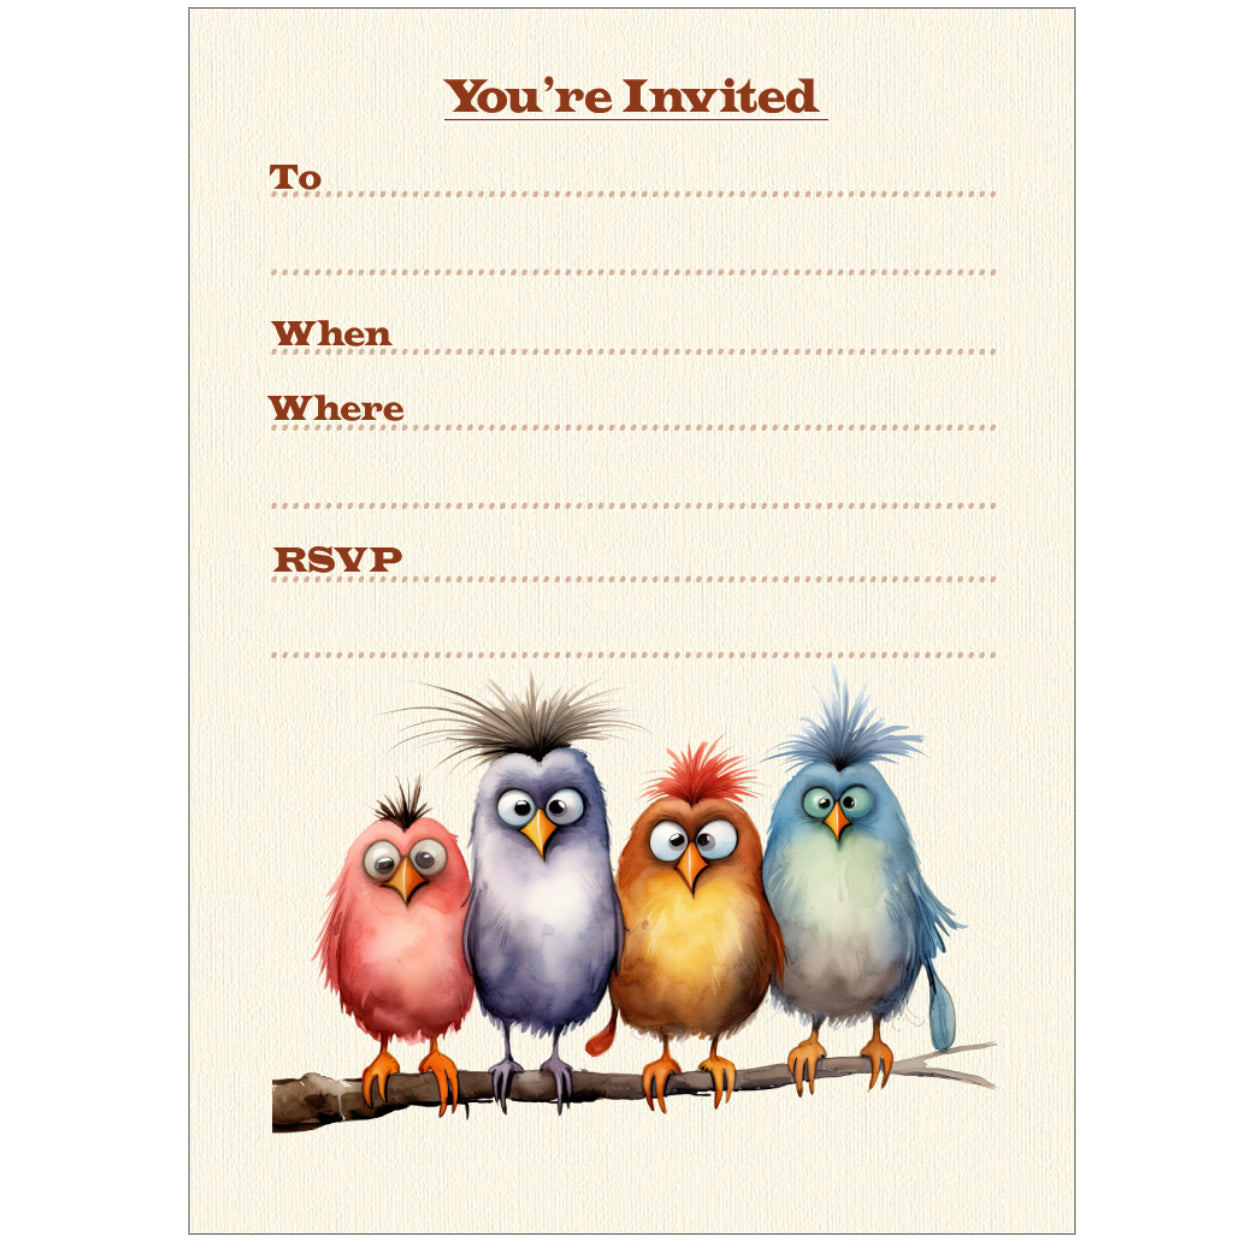 Four Fun Birds Birthday Party Invitations - Pack of 10